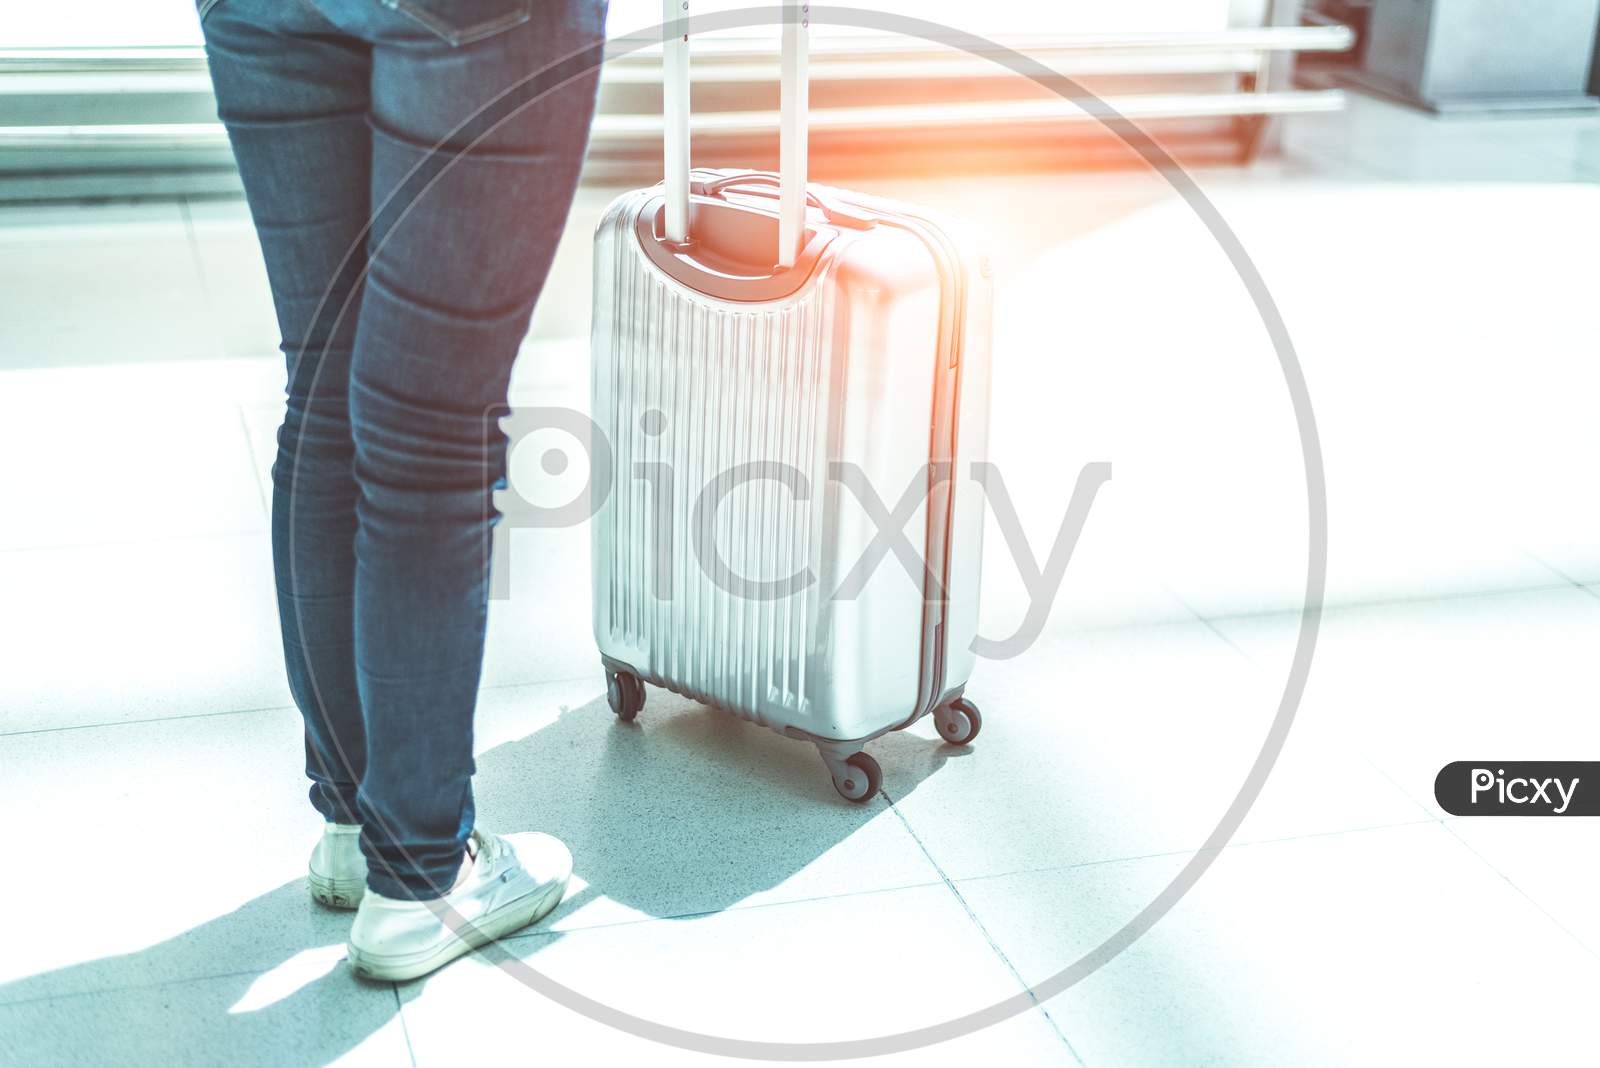 Close Up Woman And Suitcase Trolley Luggage In Airport. People And Lifestyles Concept. Travel And Business Trip Theme. Woman Wearing Jeans Going On Tour And Traveling Around The World By Alone.